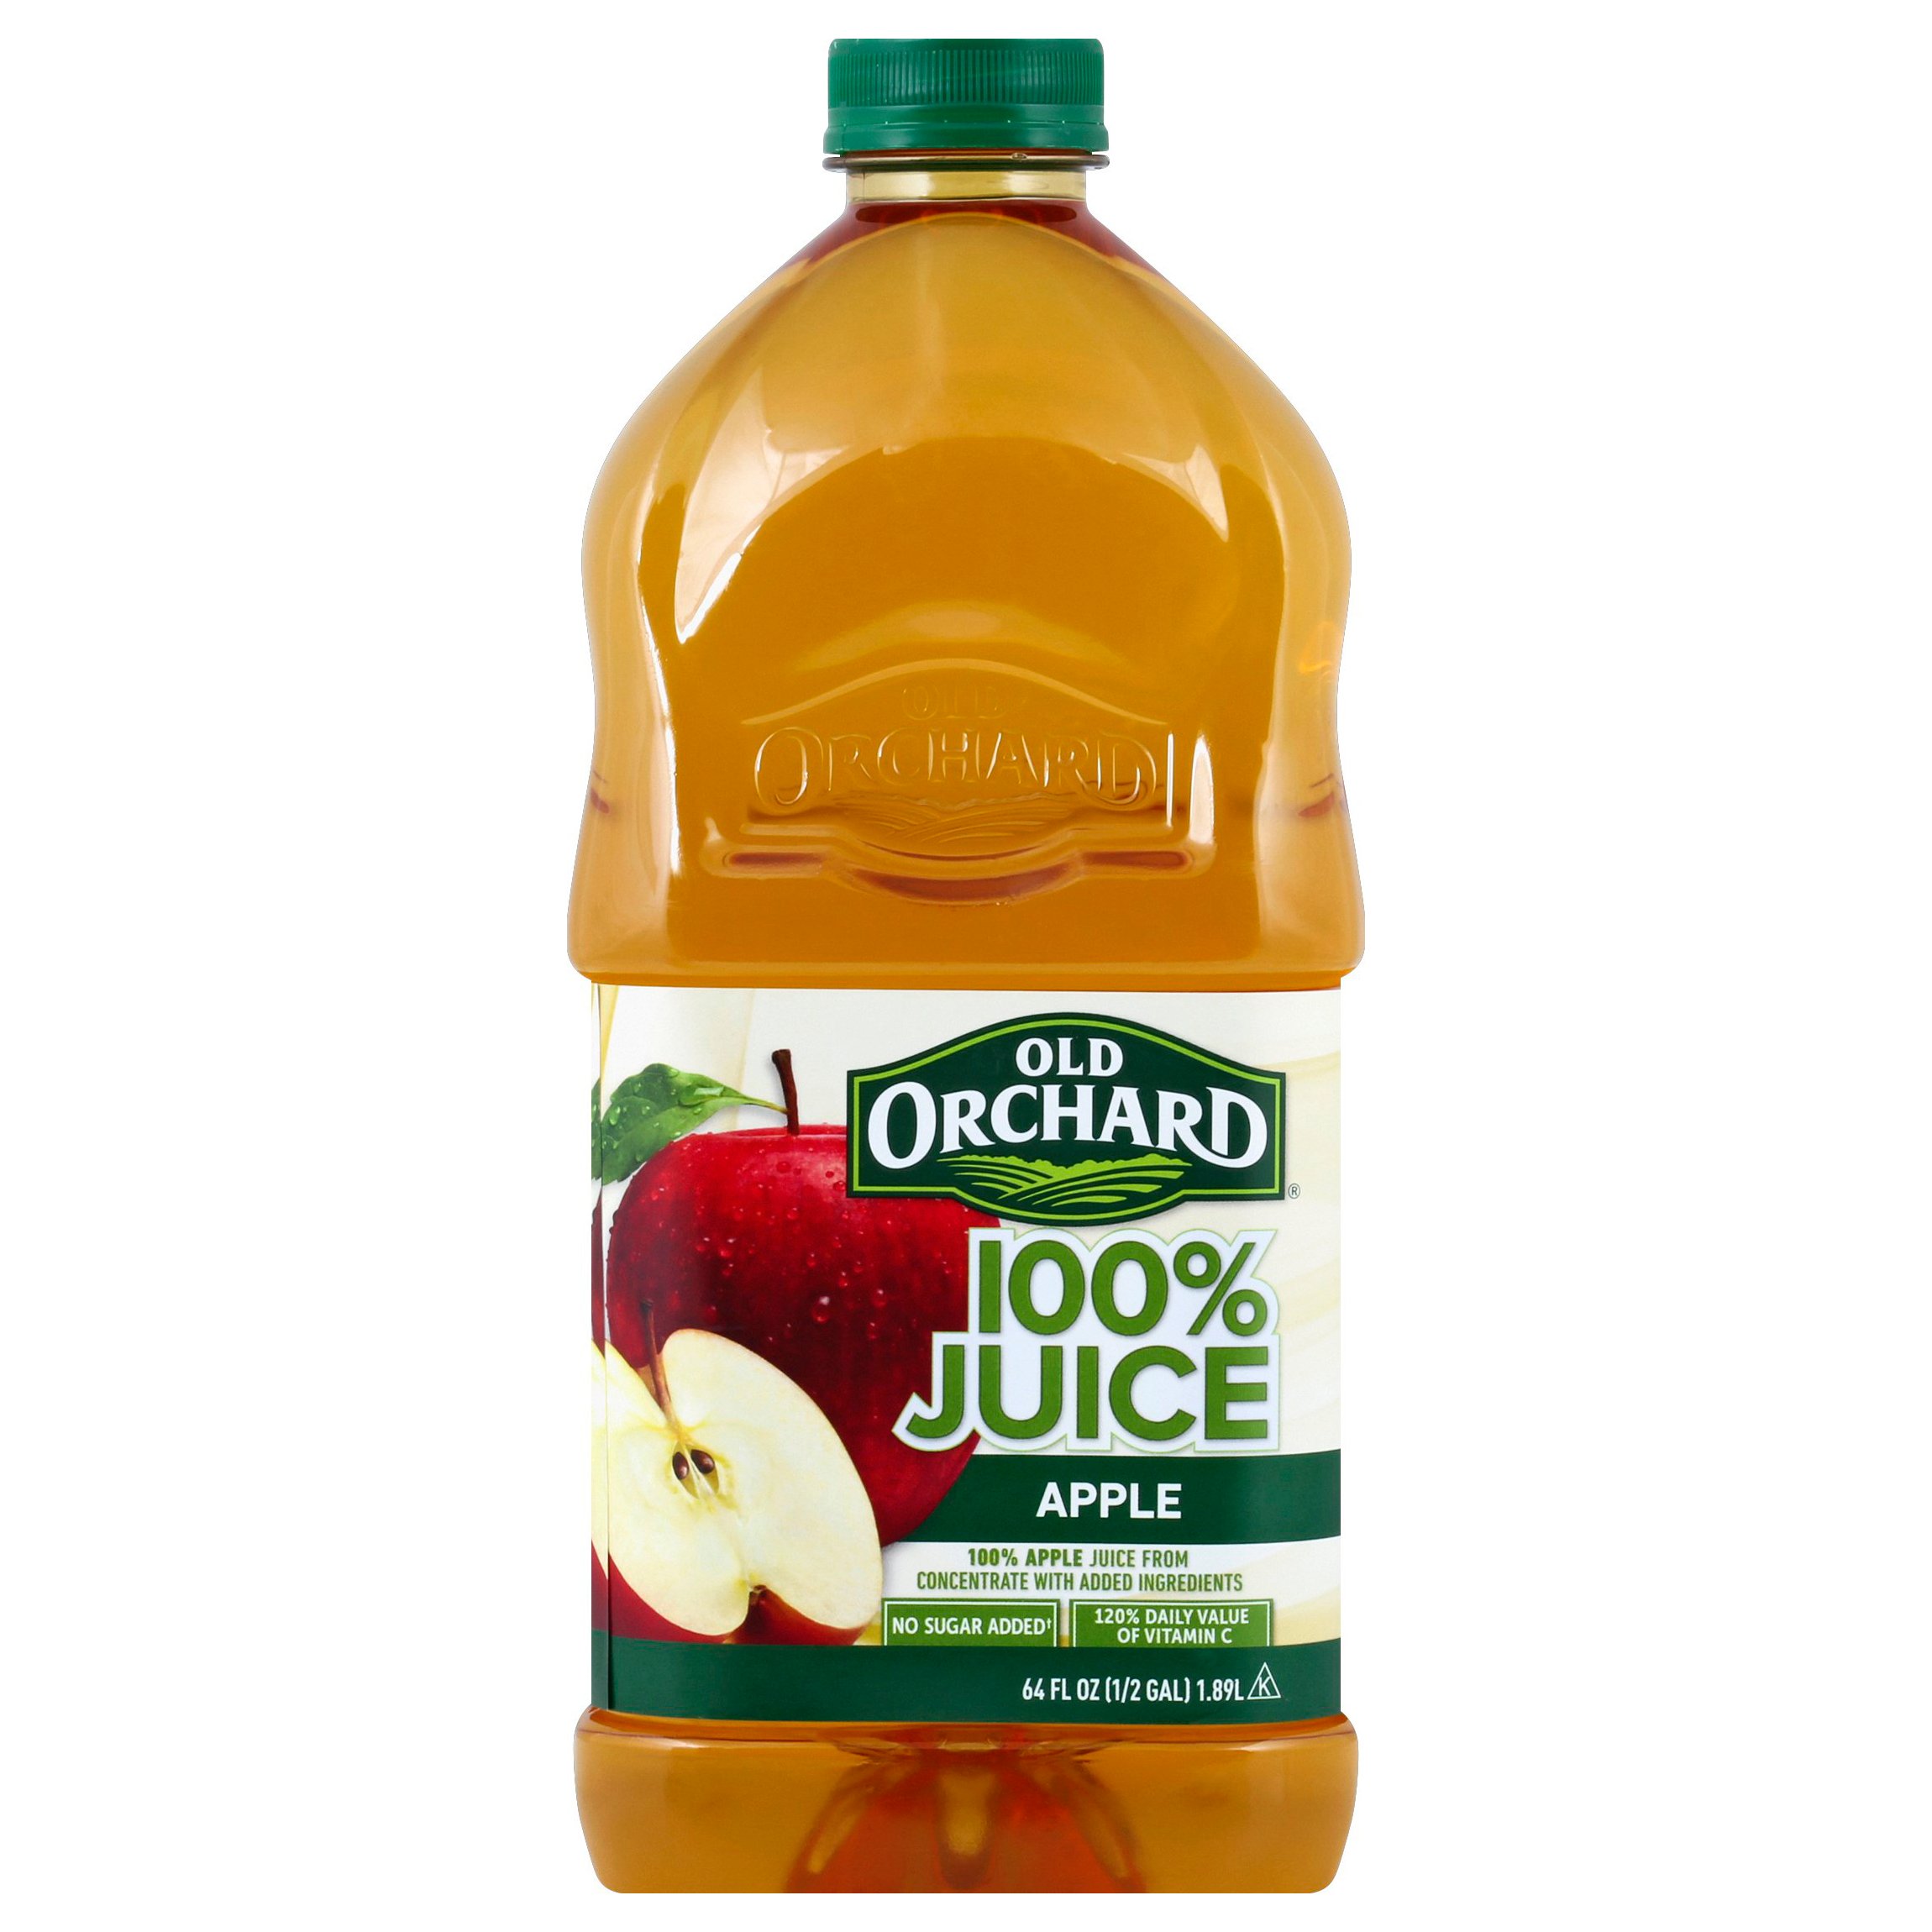 Make A Apple Juice Typical Of Pontianak City